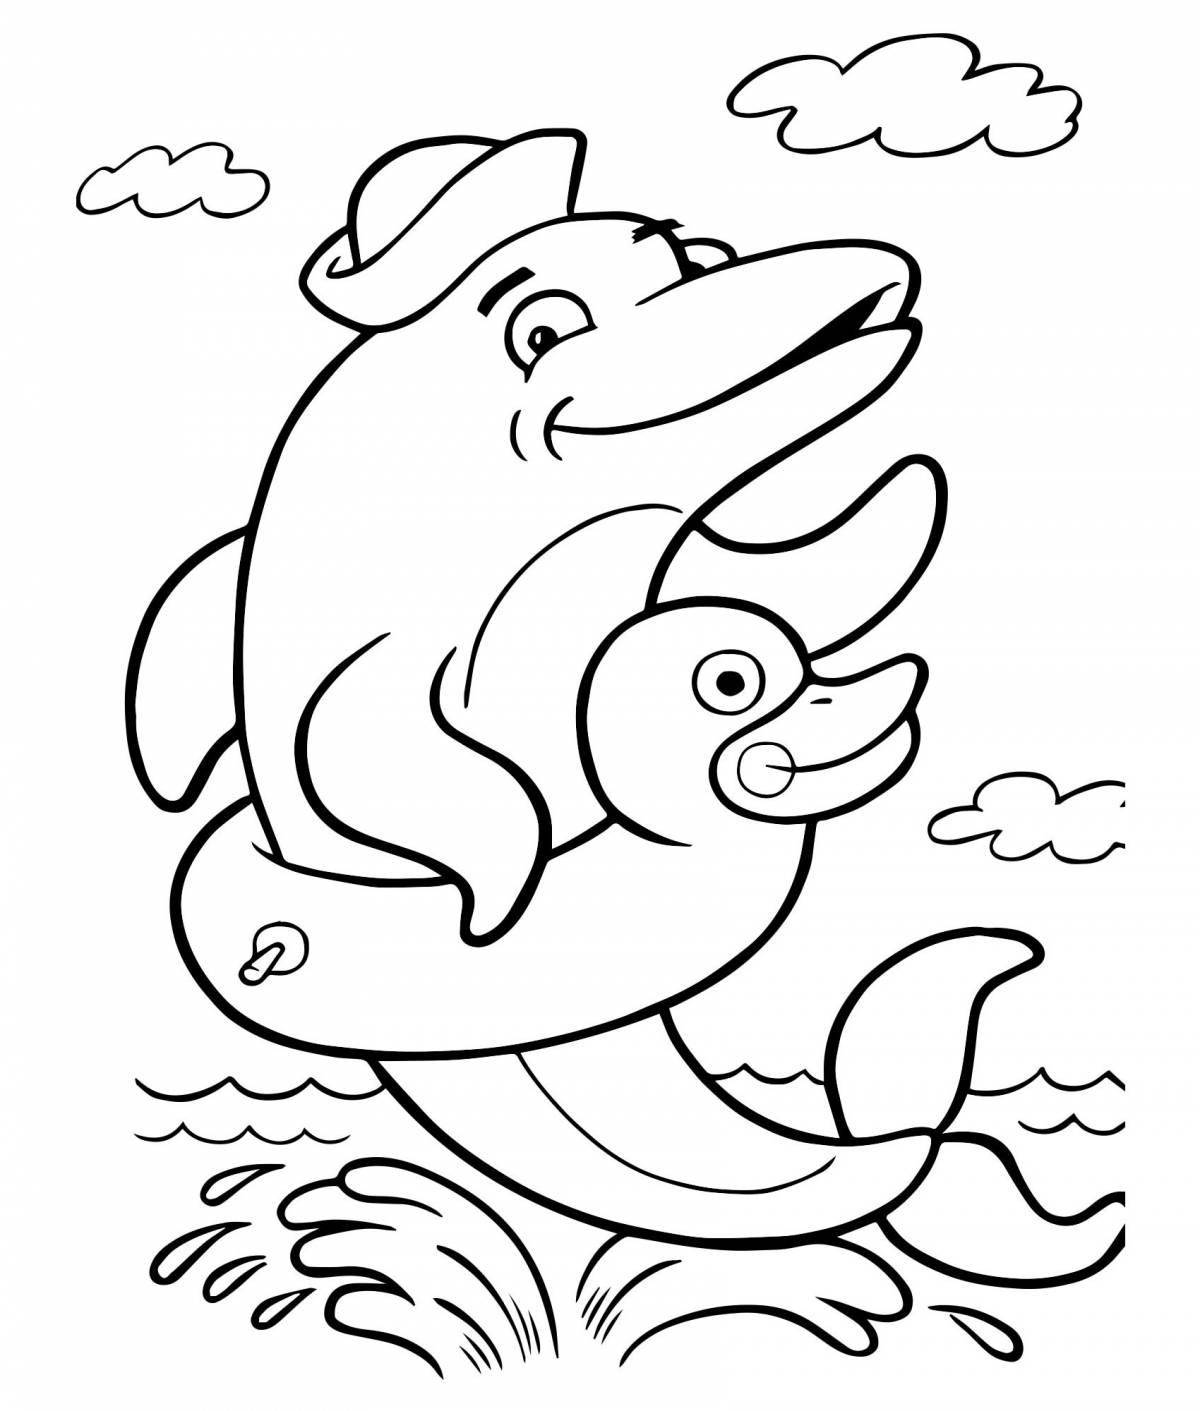 Glowing dolphin coloring book for kids